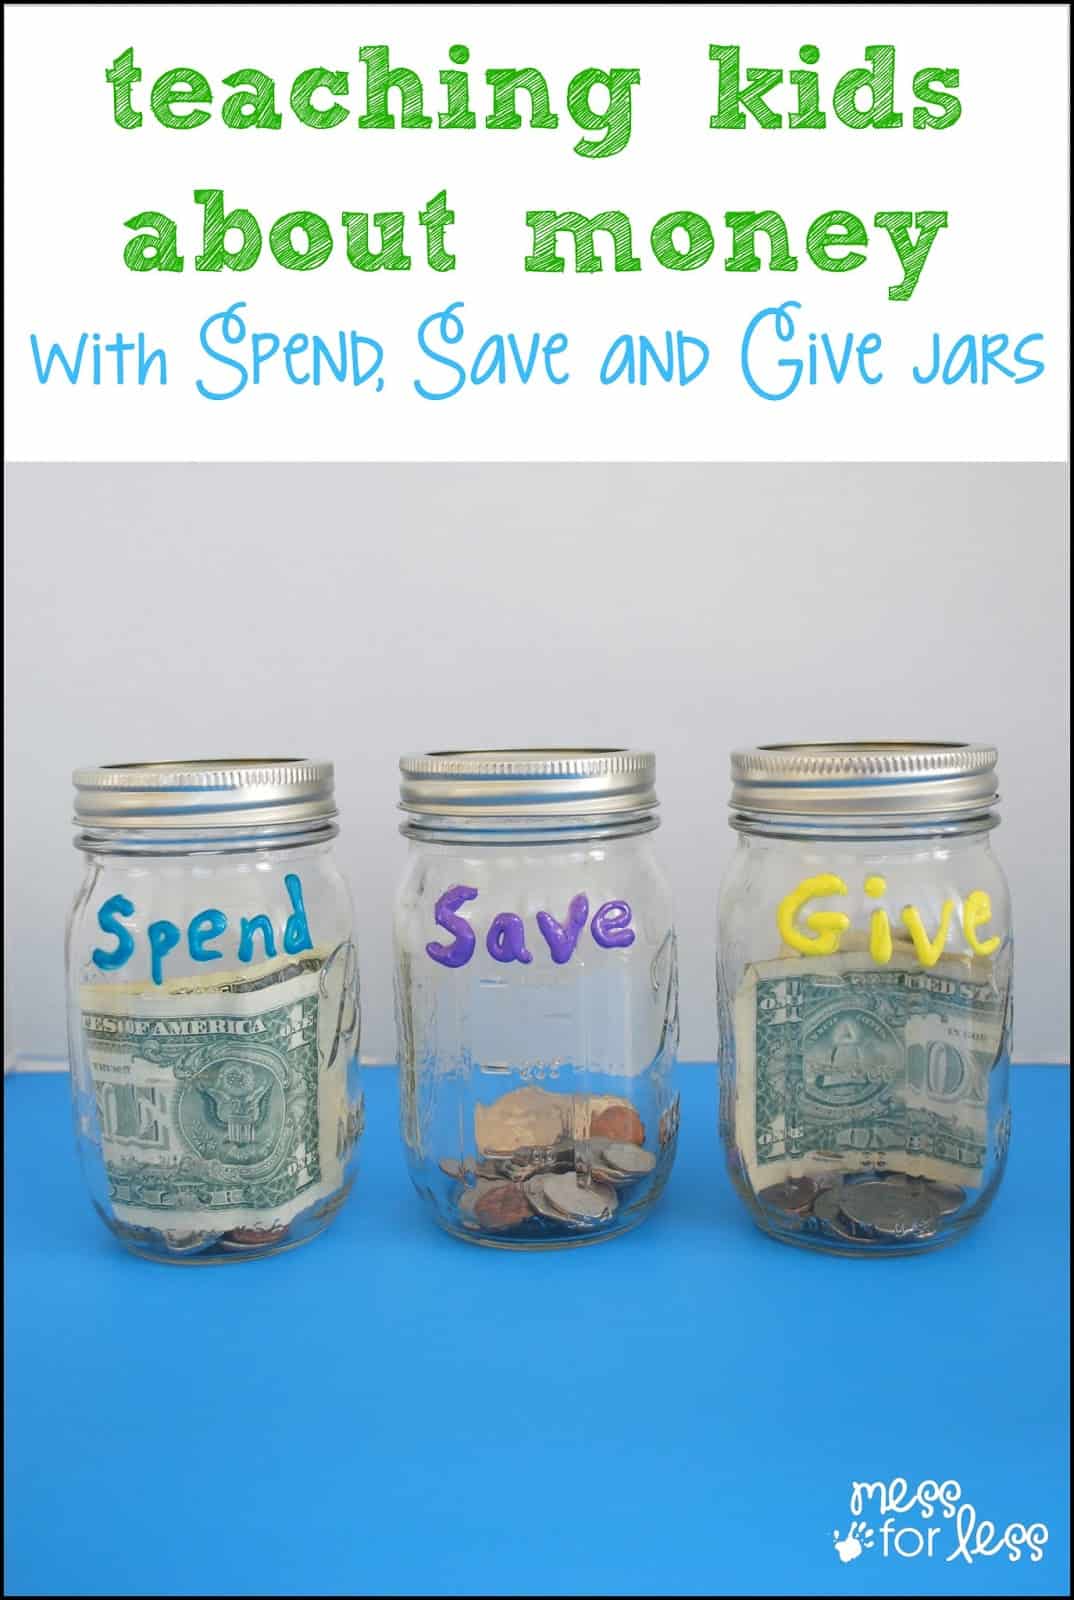 Teaching Kids About Money with Spend, Save, Give Jars - A simple and fun way to help kids learn to manage money